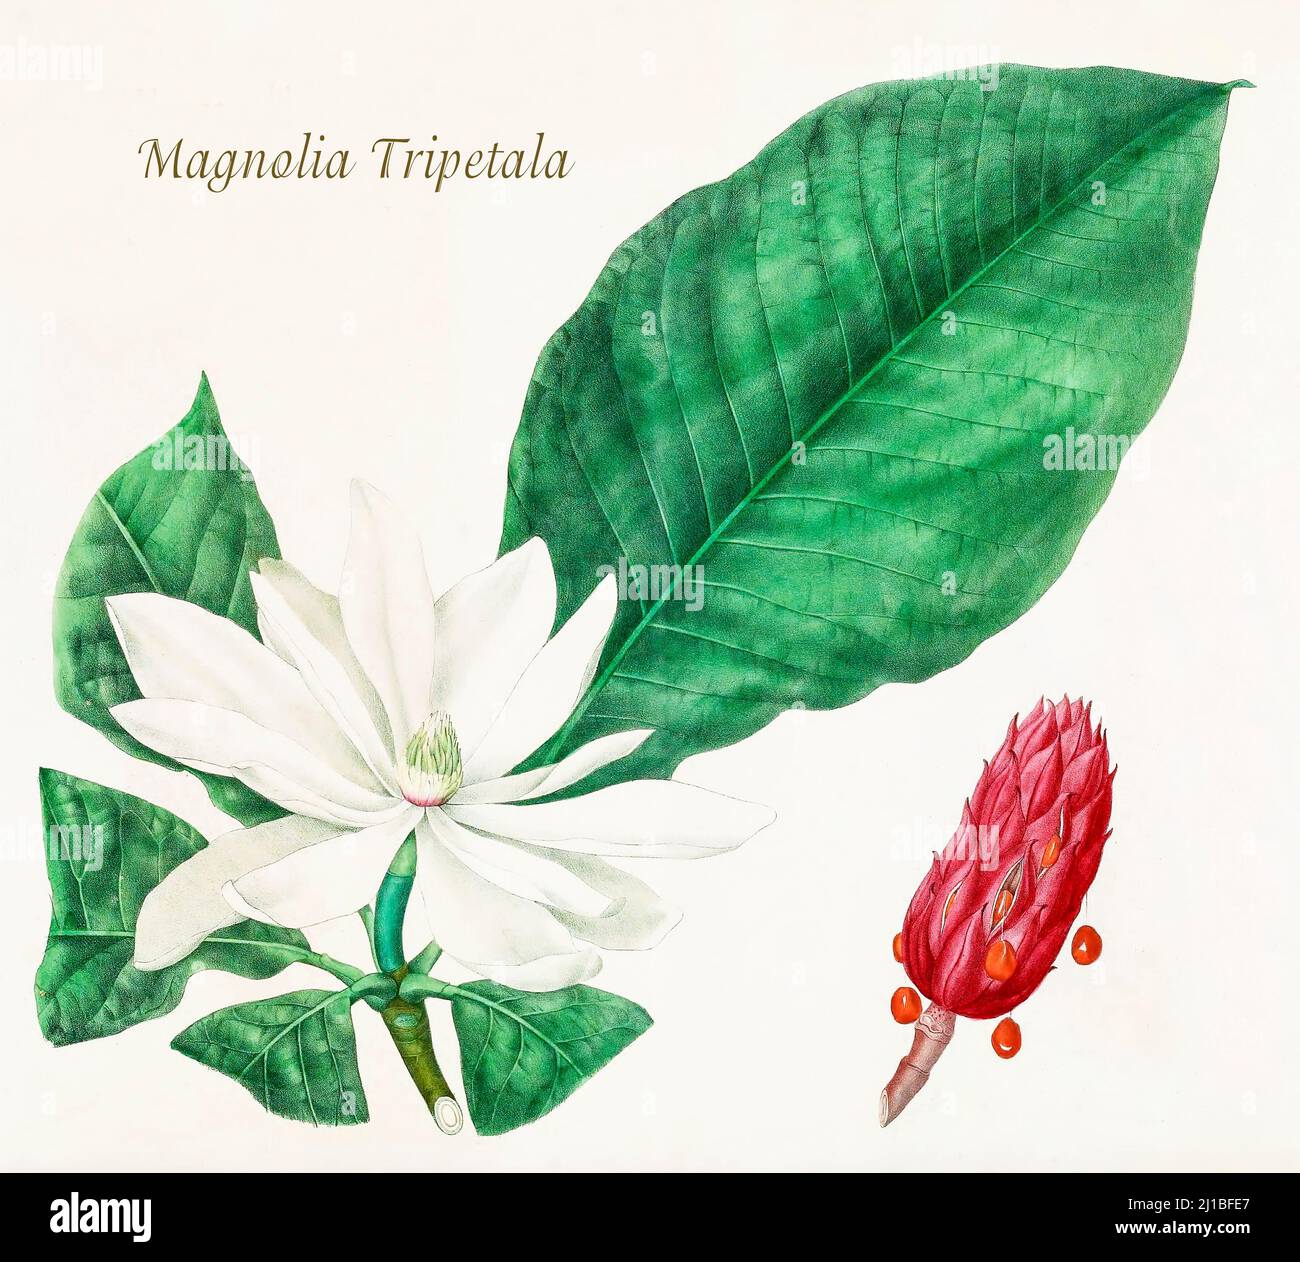 A late 19th century illustration of Magnolia tripetala, aka Umbrella Magnolia  a tree of the family Magnoliaceae native to the southeastern United States. The illustration by Asa Gray prepared between the years 1849 and 1859, to accompany a report on the forest trees of North America, Washington. Stock Photo